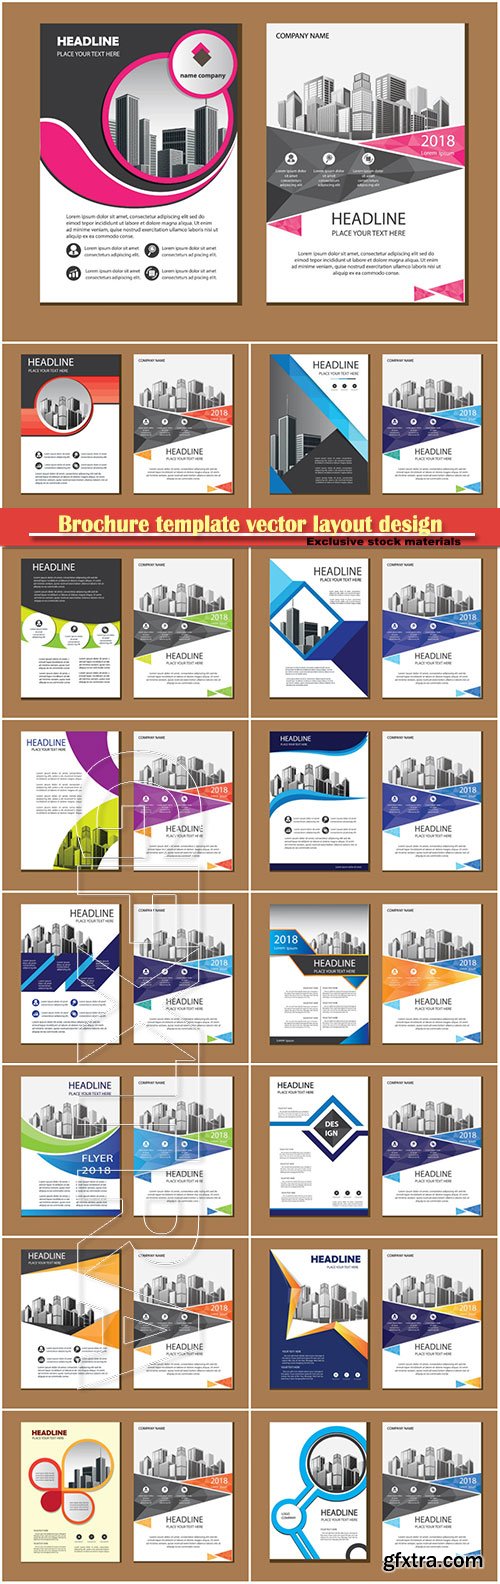 Brochure template vector layout design, corporate business annual report, magazine, flyer mockup # 164